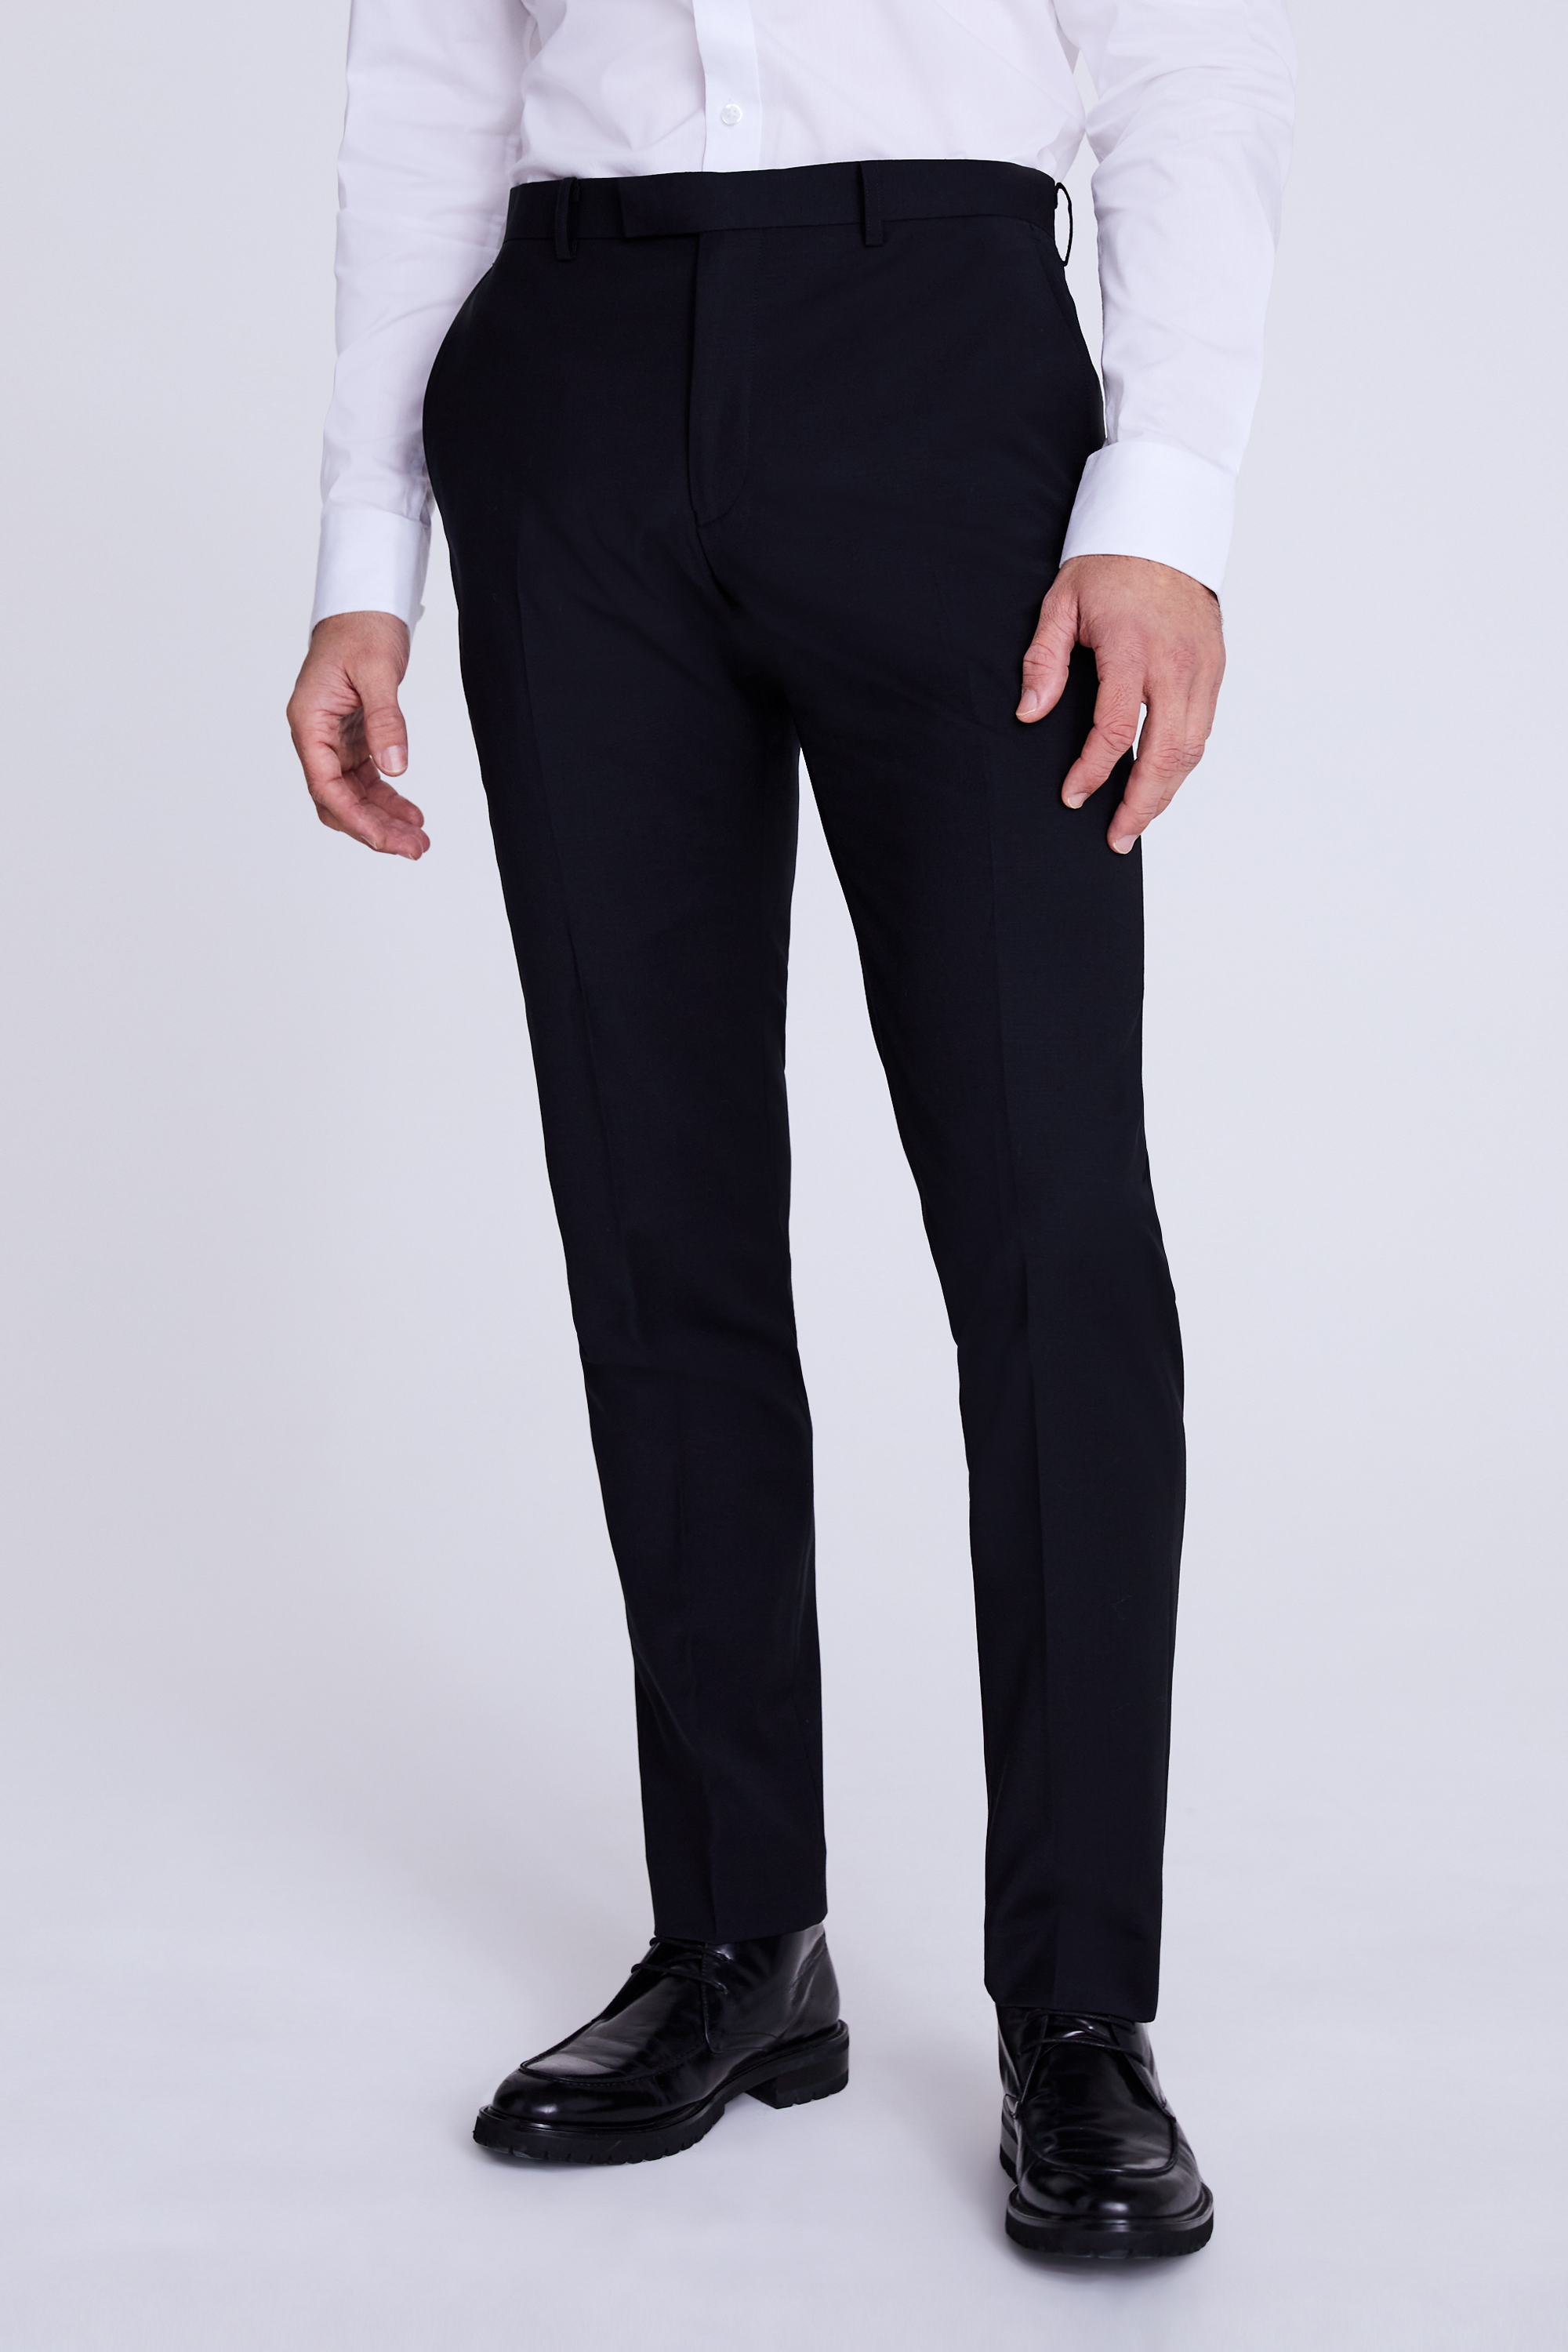 Performance Tailored Fit Black Trousers | Buy Online at Moss